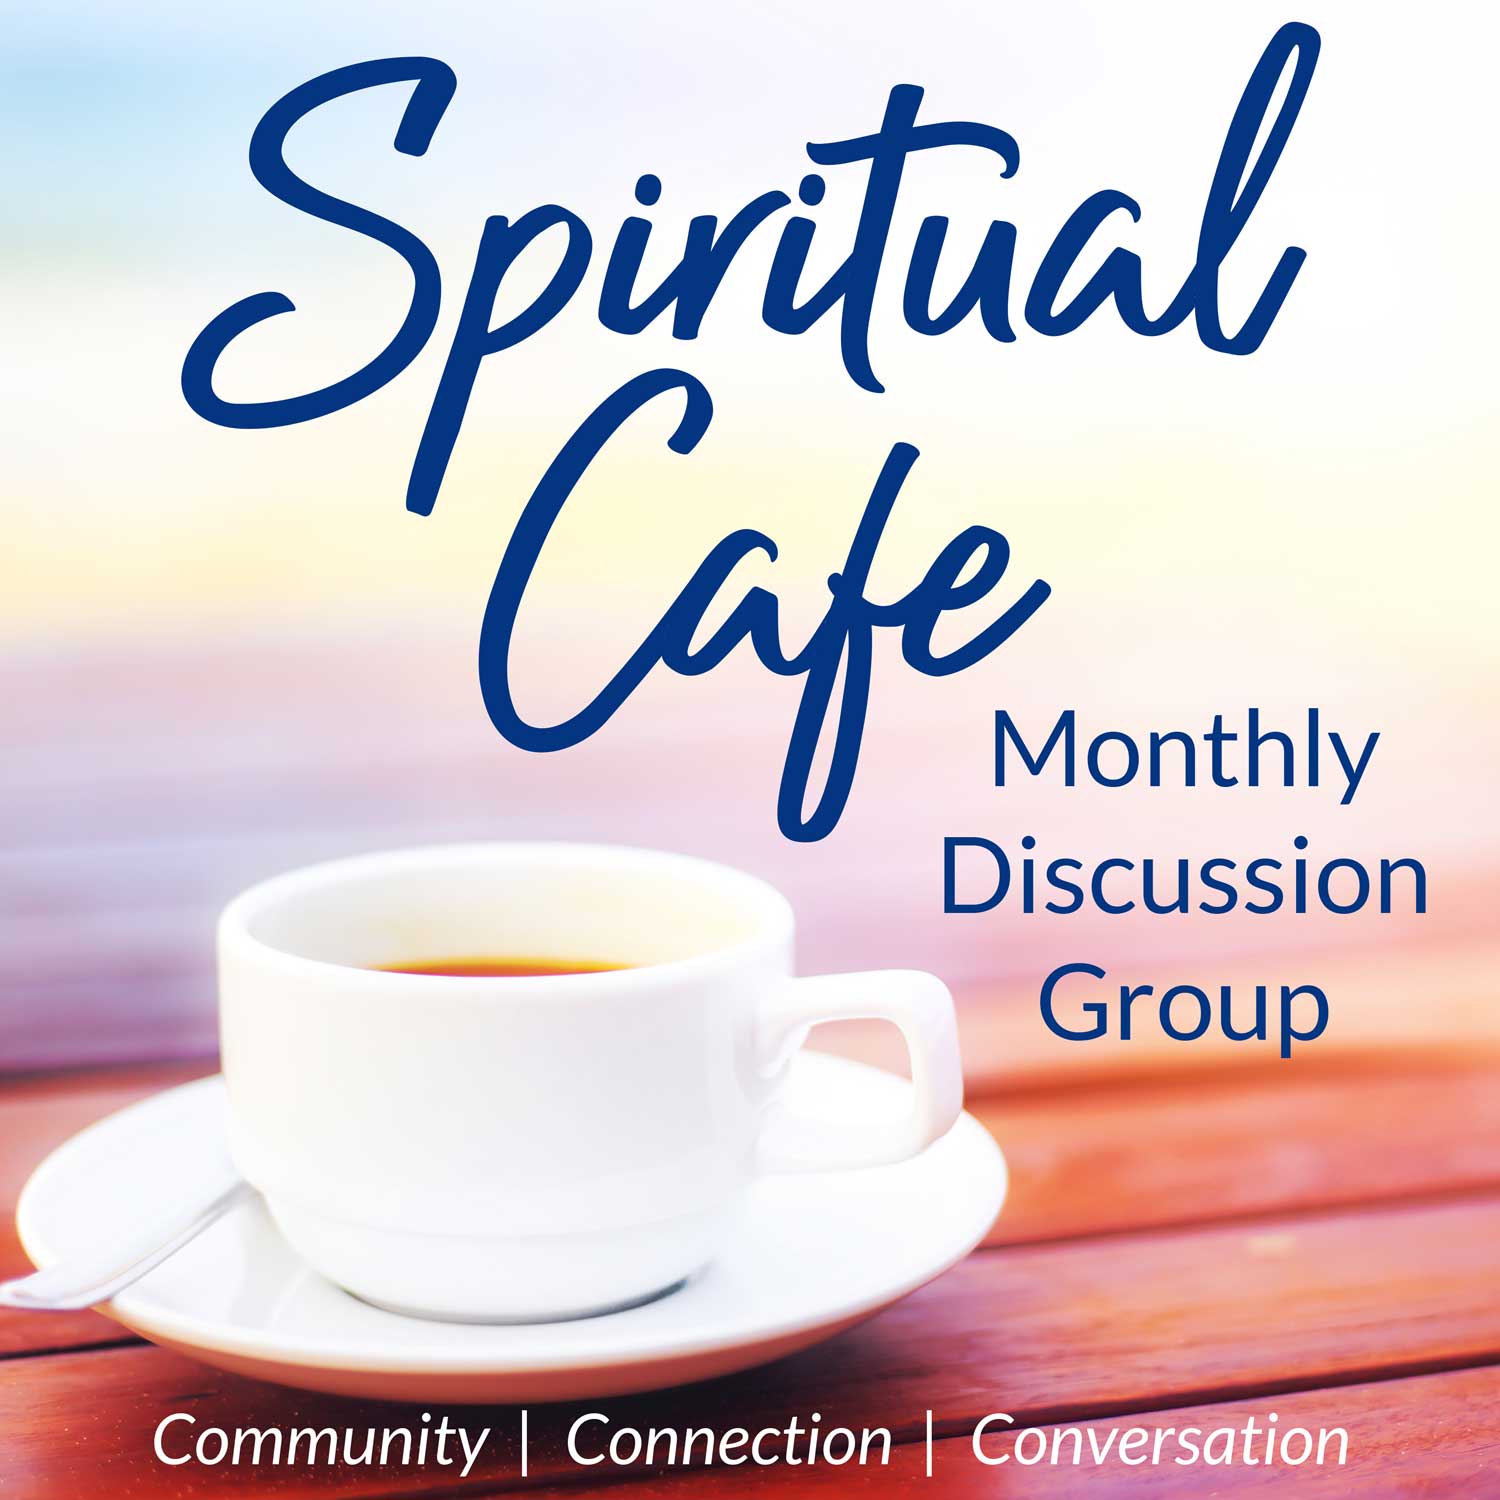 Spiritual Cafe: Monthly Discussion Group